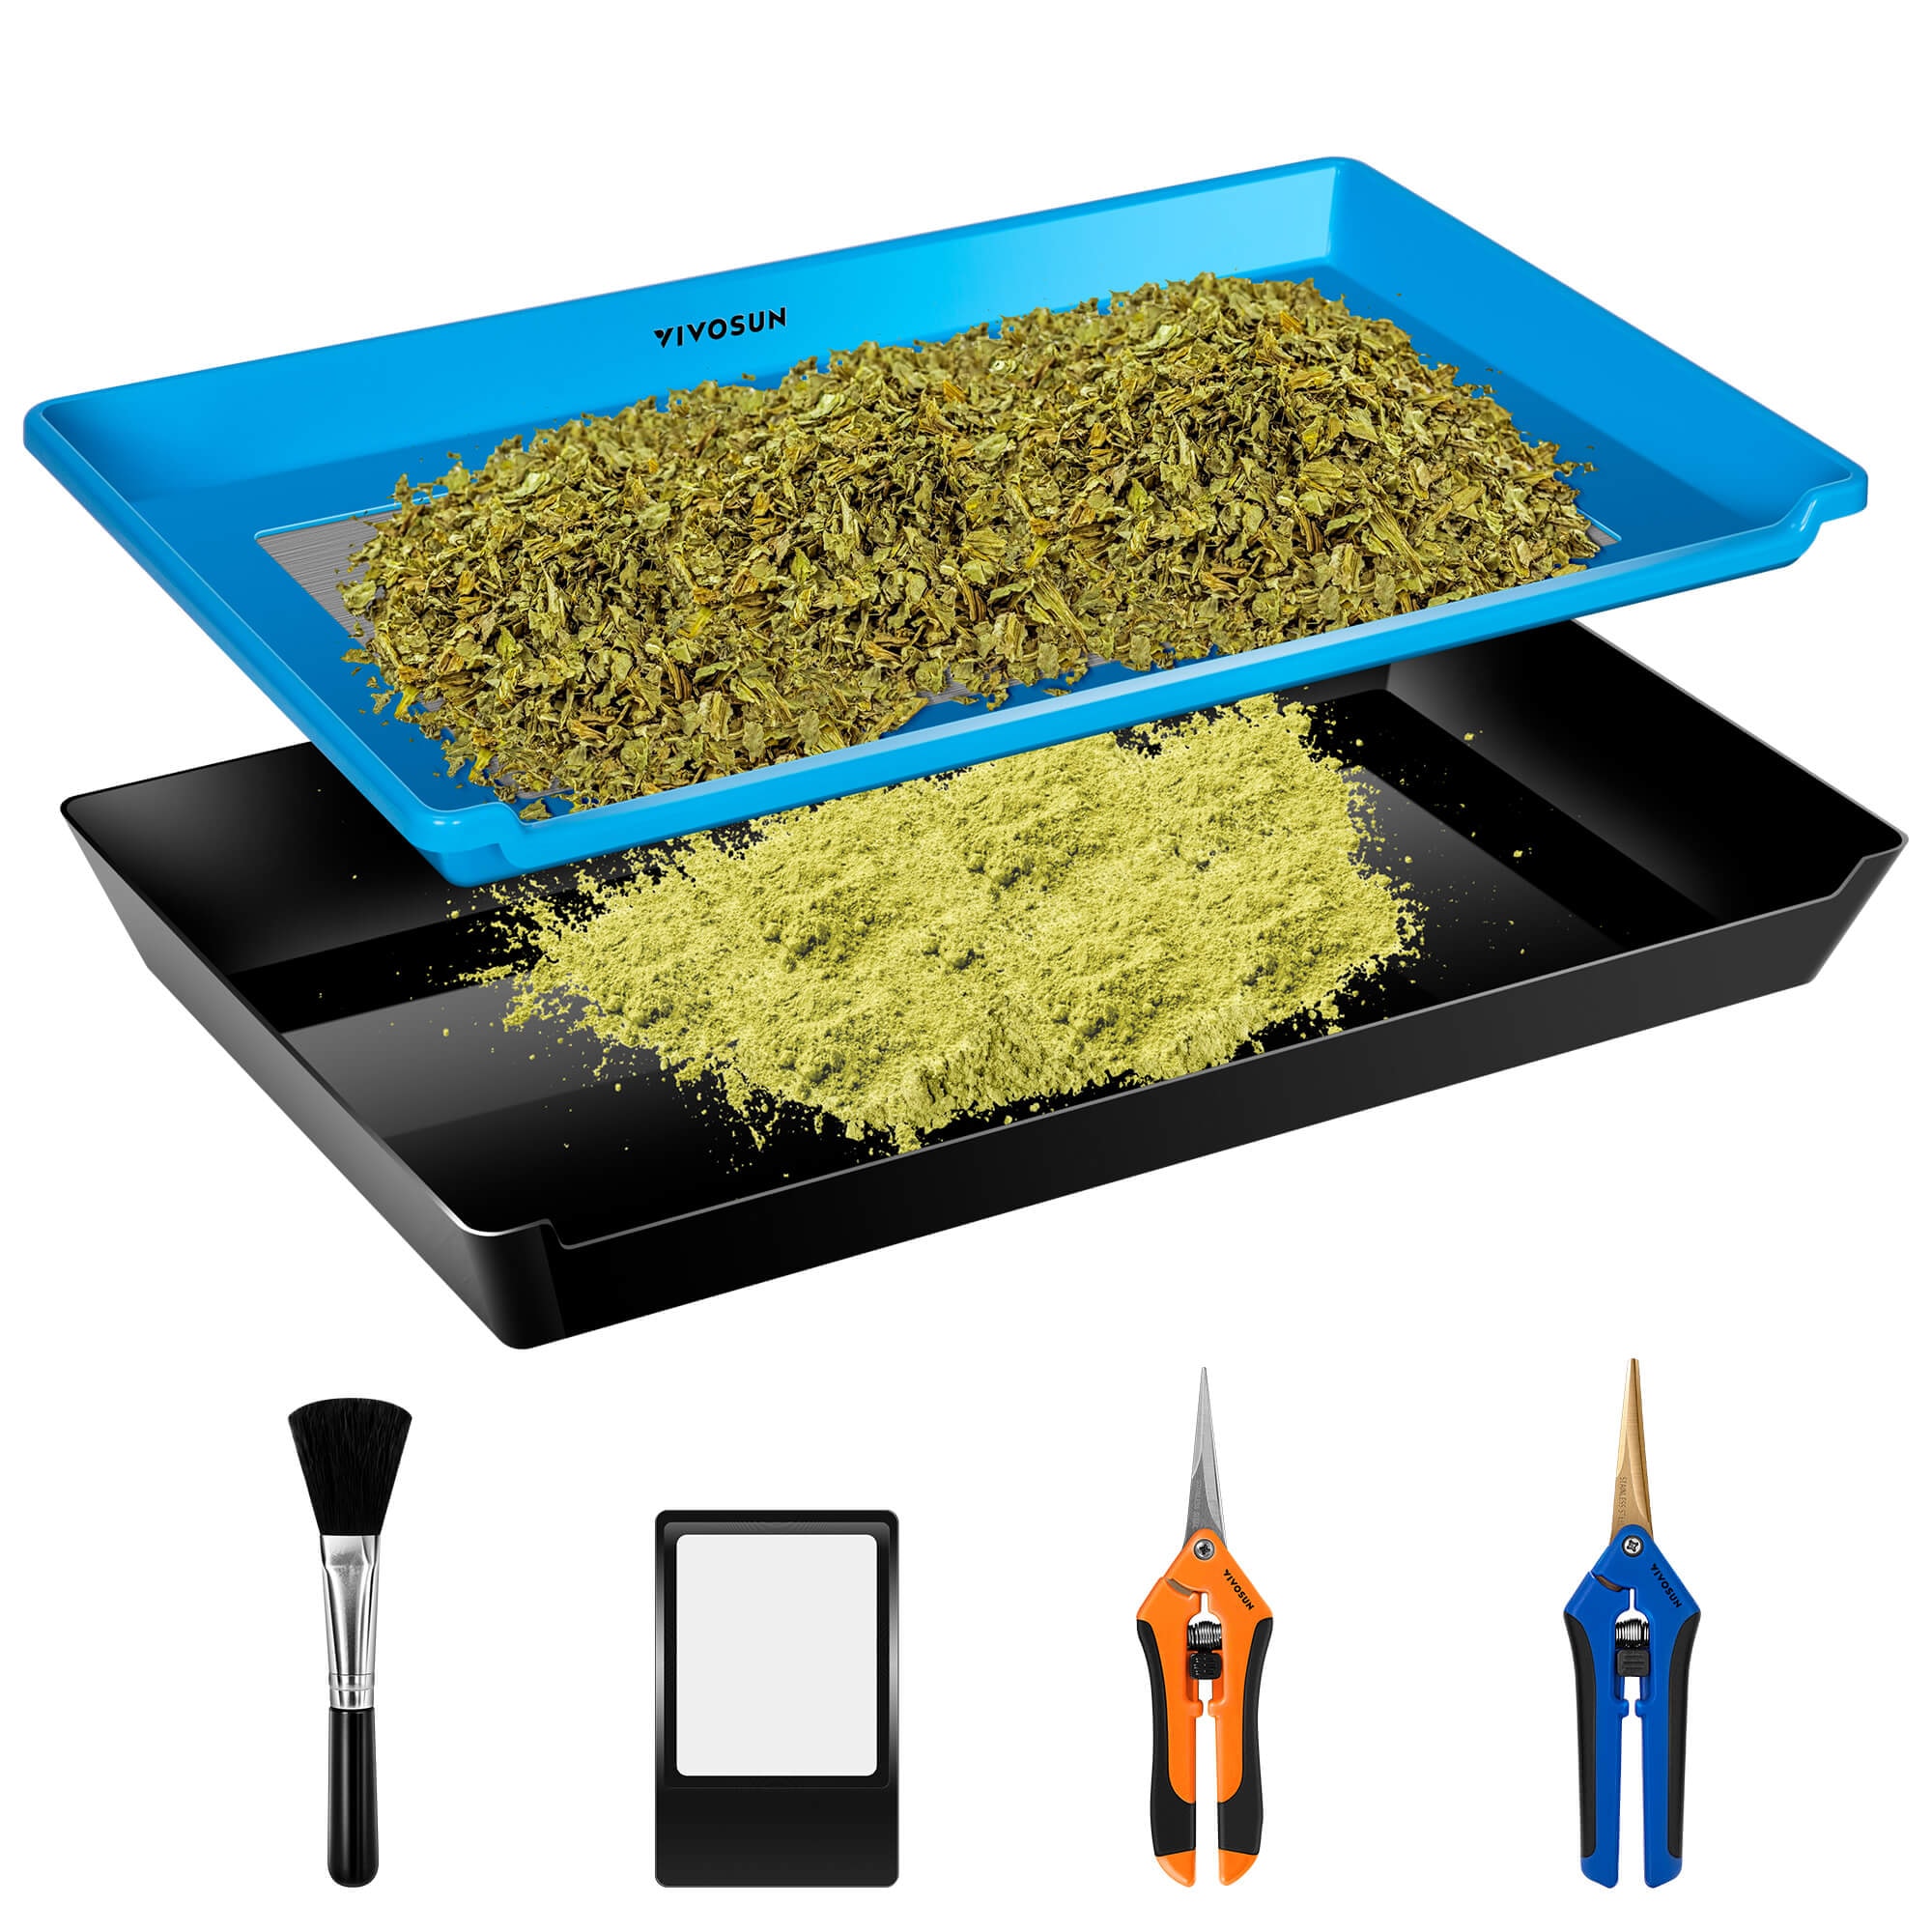 Heavy Duty 2-in-1 Trimming Tray for Herbs Collecting, Trimming Tray Set with 150 Micron Fine Mesh Screen and 2 Trimming Scissors Blue